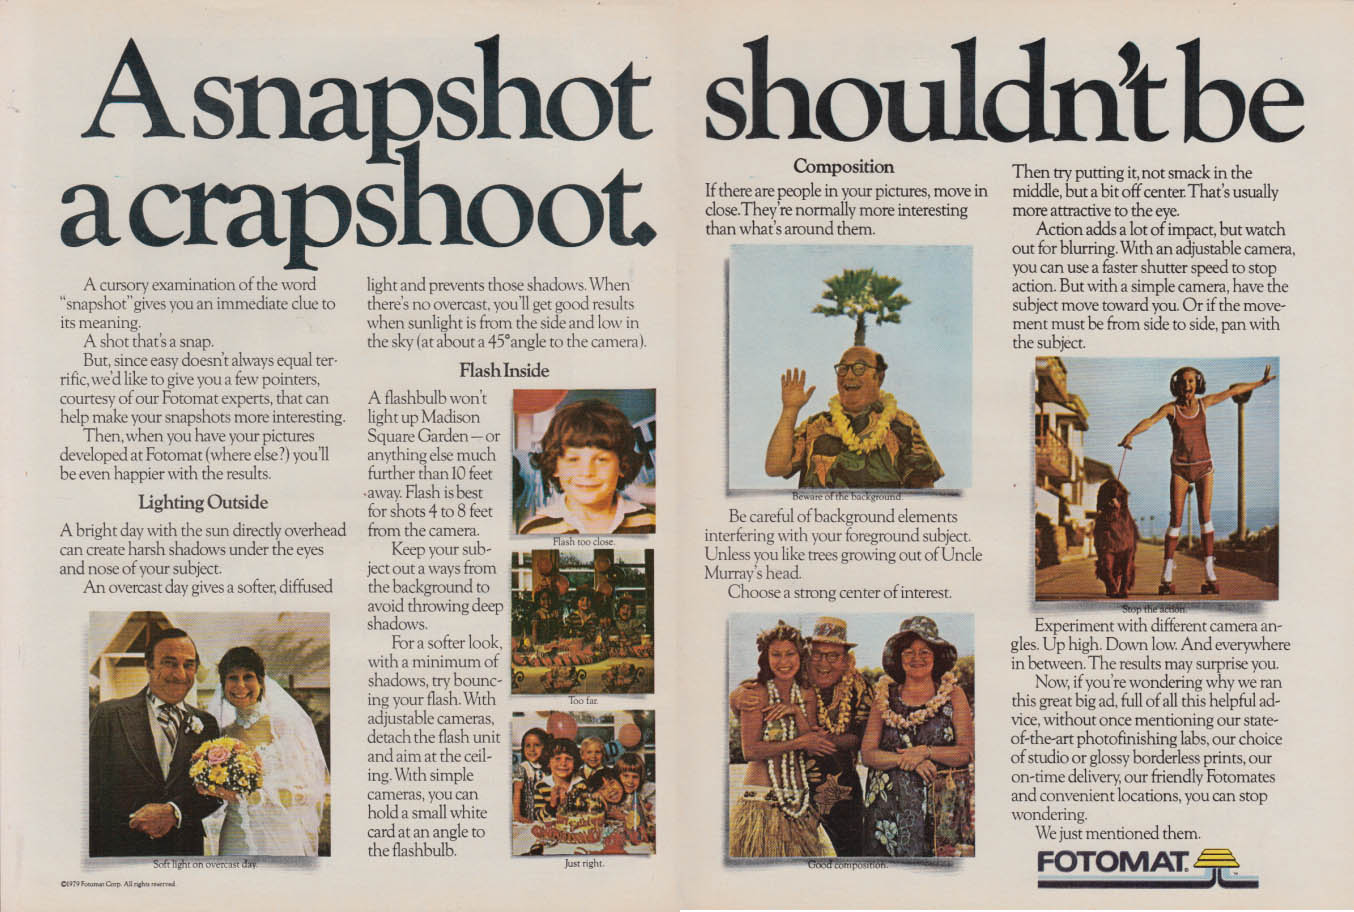 Image for A snapshot shou;dn;t be a crapshoot: Fotomat ad 1979